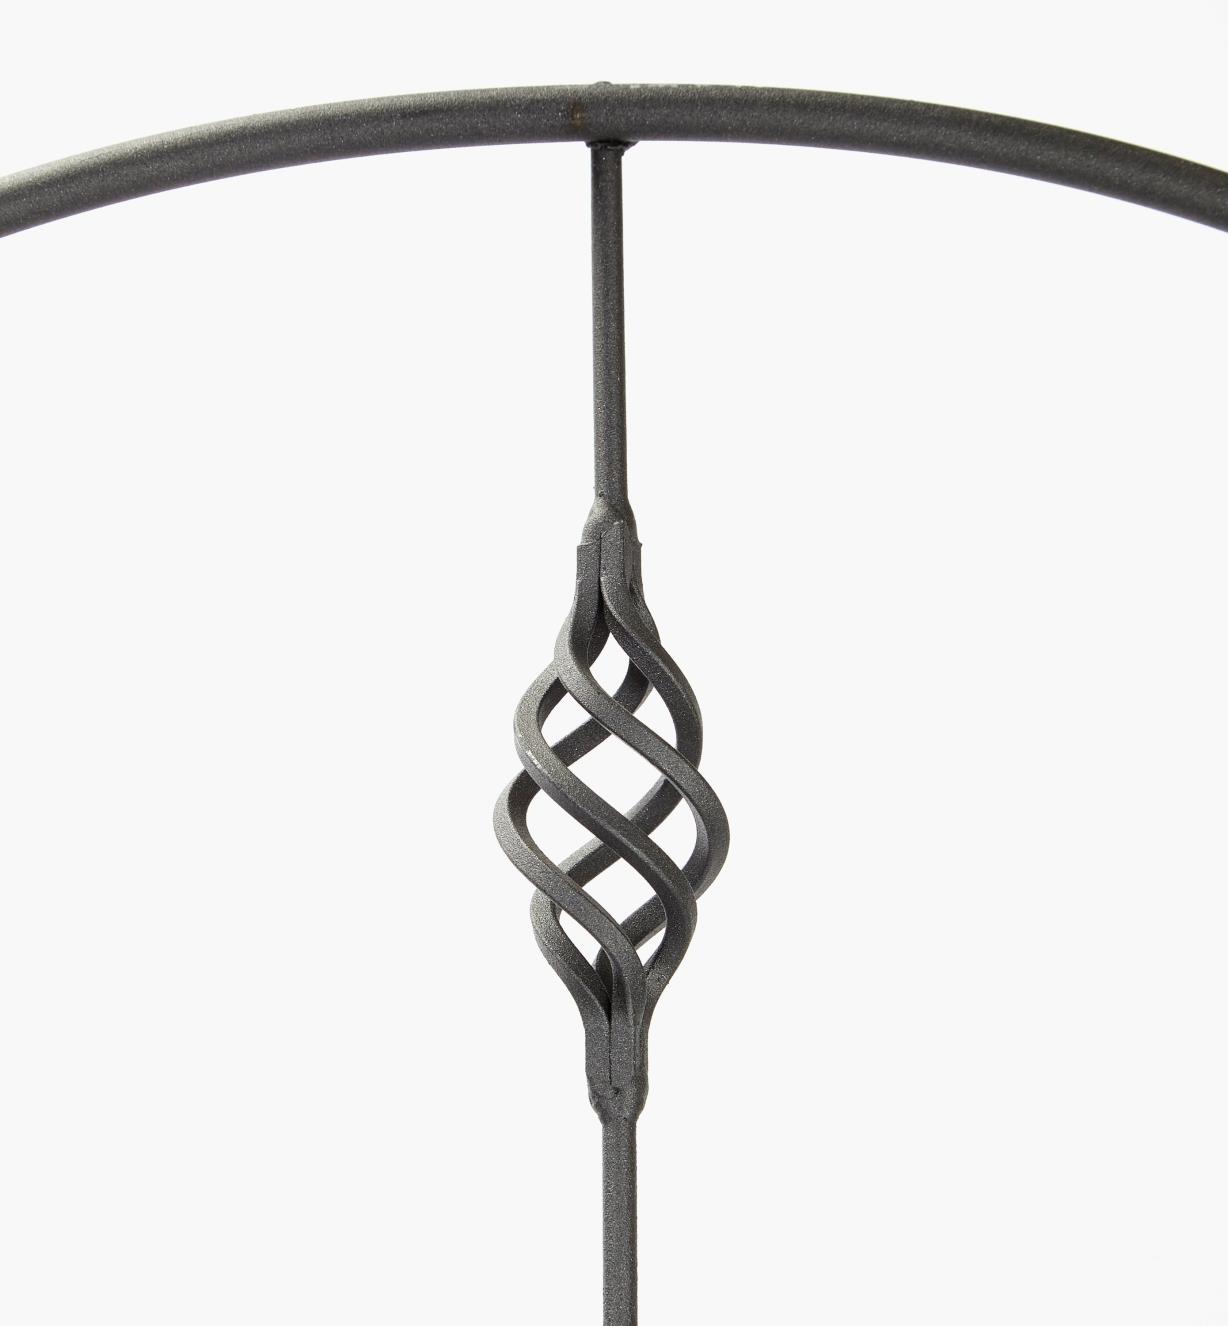 Closer view of decorative twist on the Venetian garden trellis with matte pewter finish